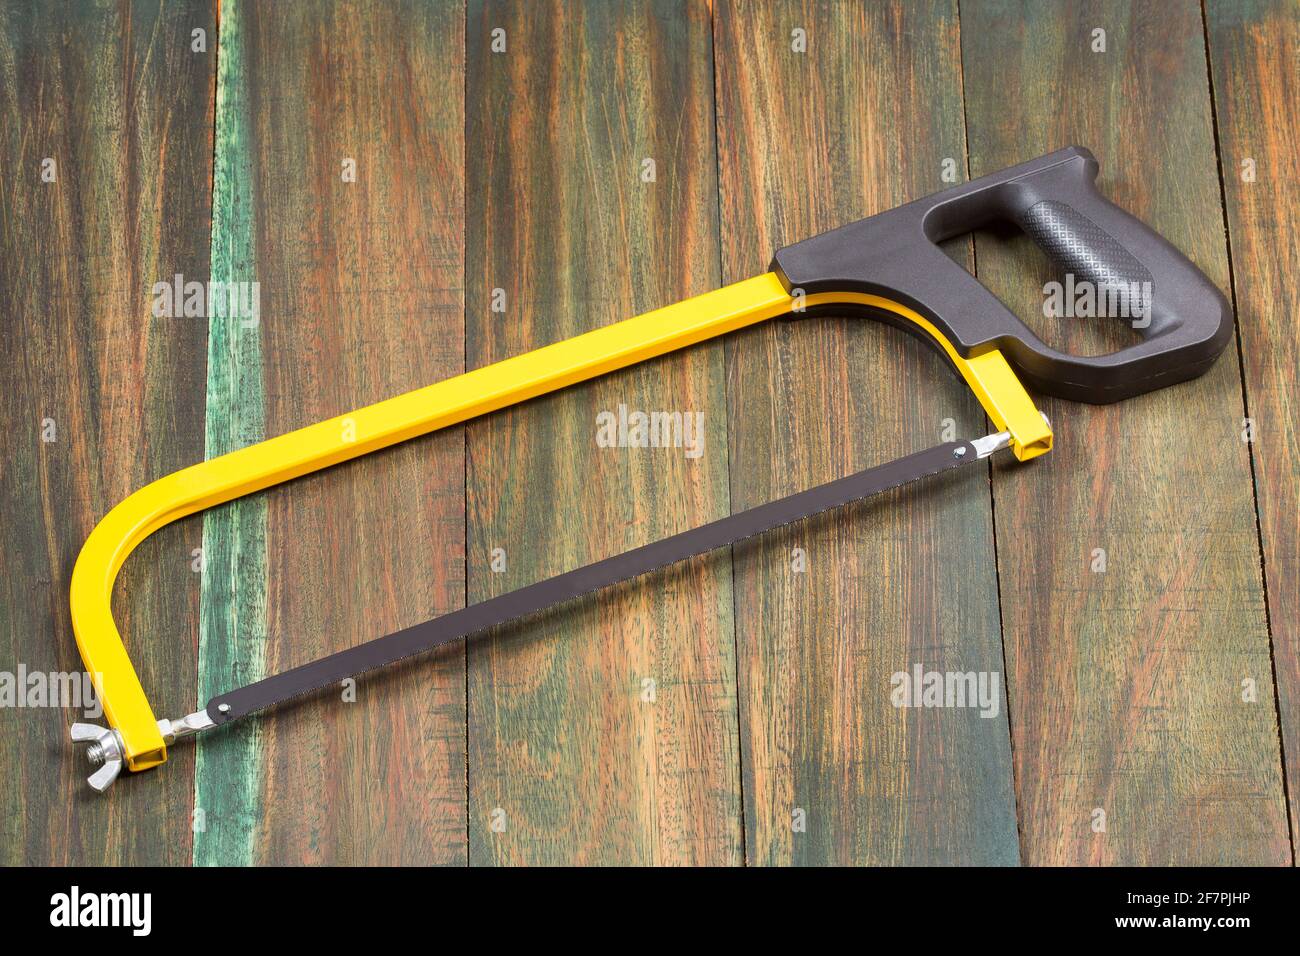 Saw bow, hand tools for sawing, isolated on wooden background Stock Photo